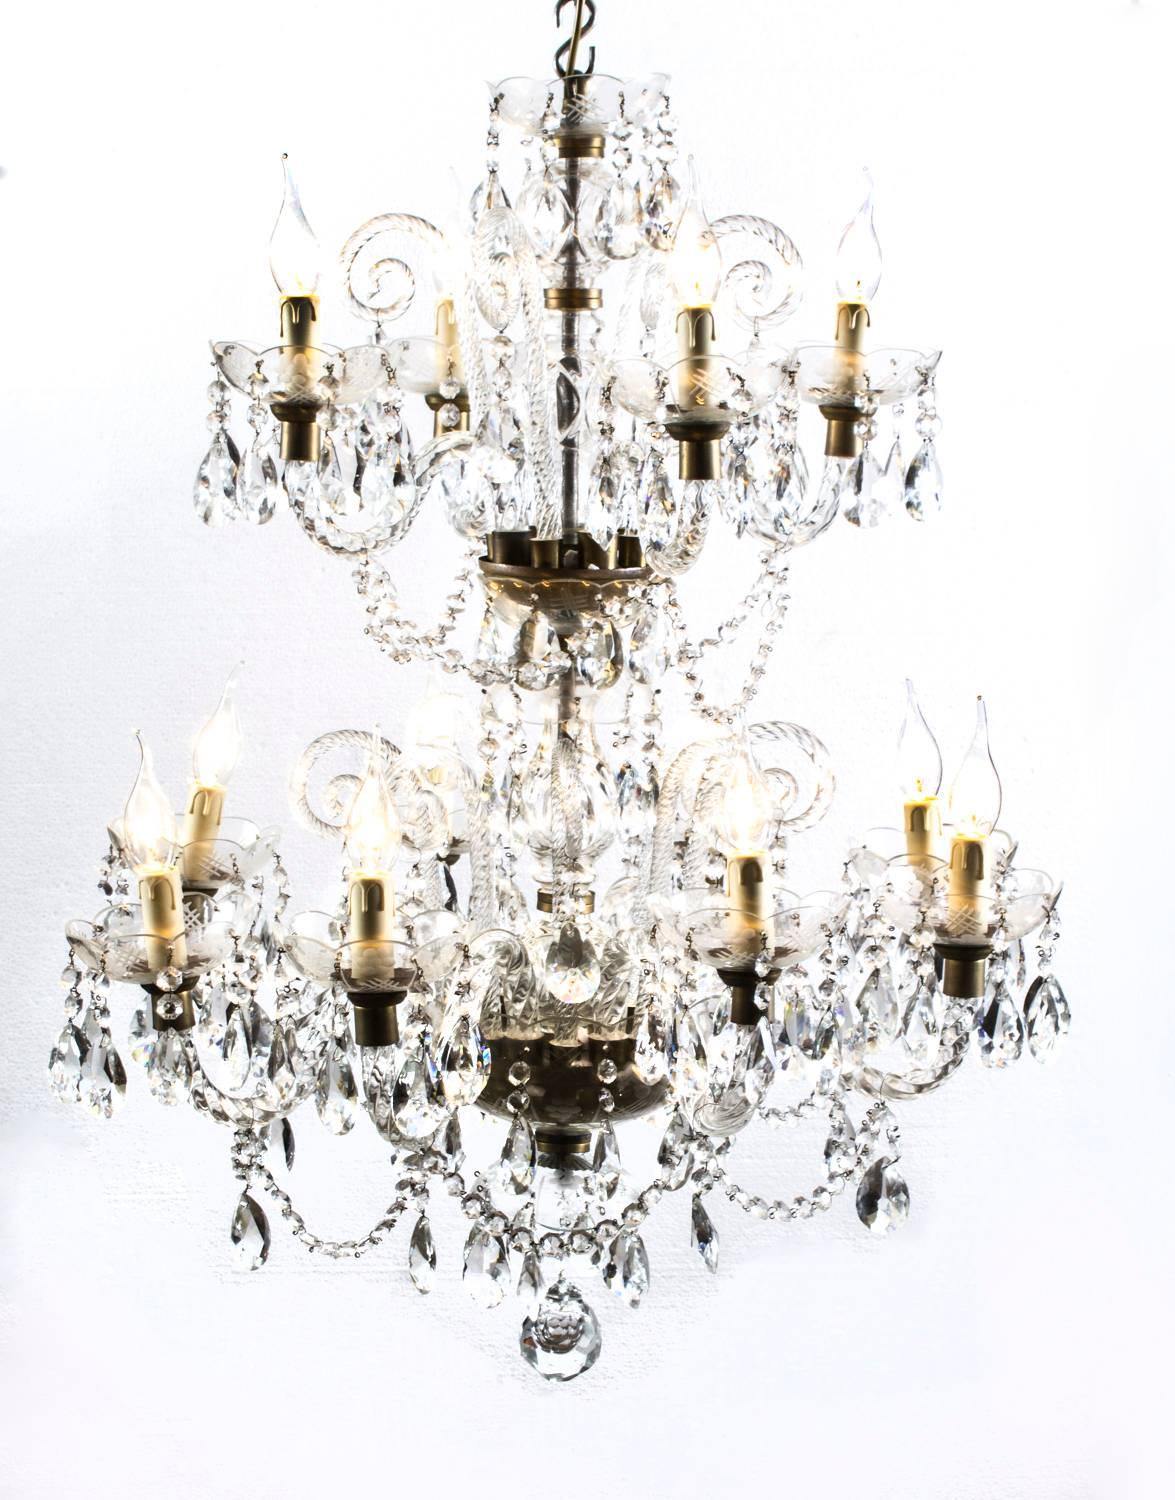 This is a stunning pair of vintage Venetian style two-tier crystal chandelier with twelve lights each and beautiful clear crystal drops, dating from the second half of the 20th century.

There are four lights on each top tier and eight on each